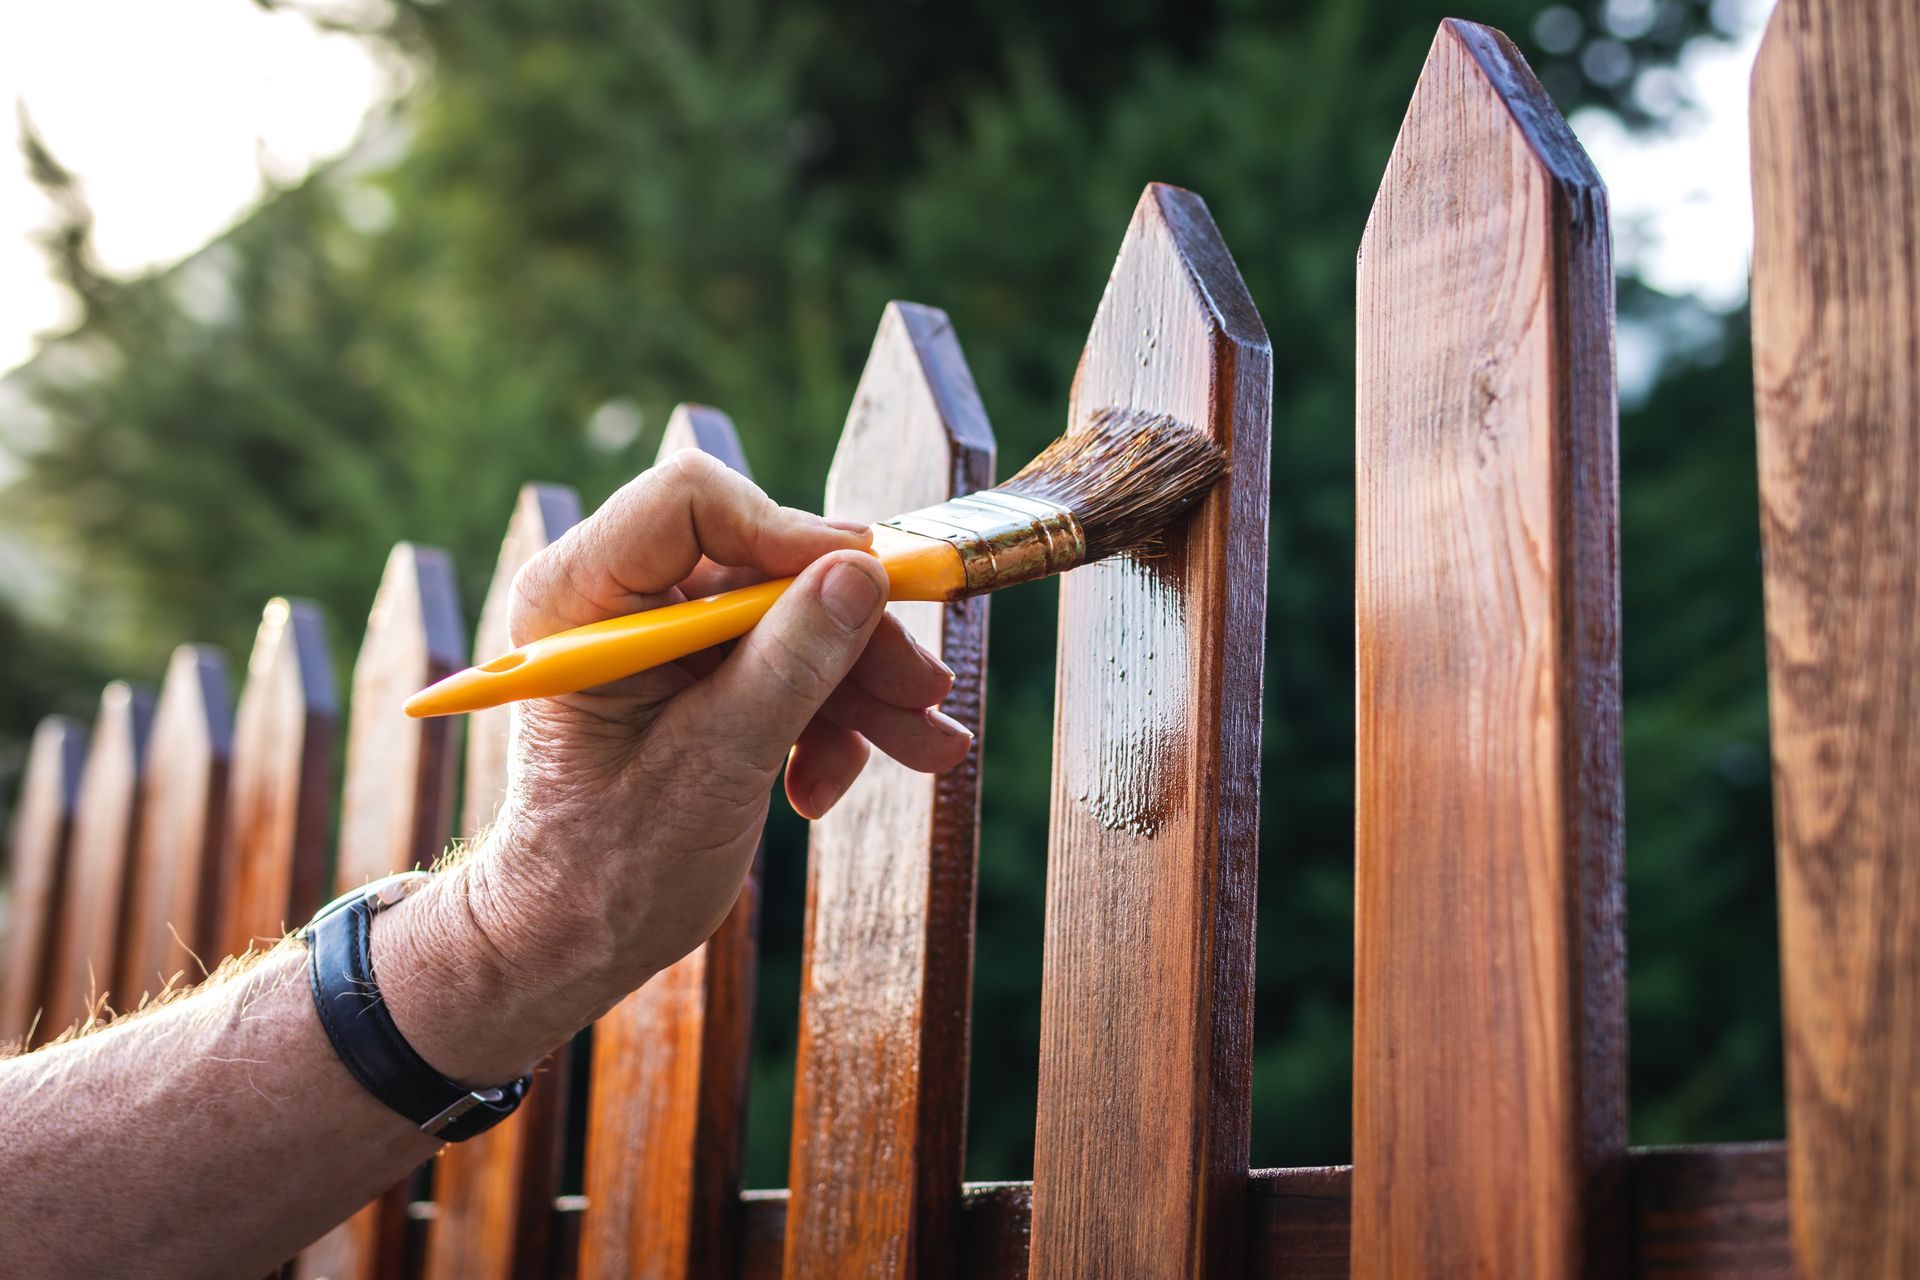 Painter applying a protective varnish on a wooden picket fence in a backyard.